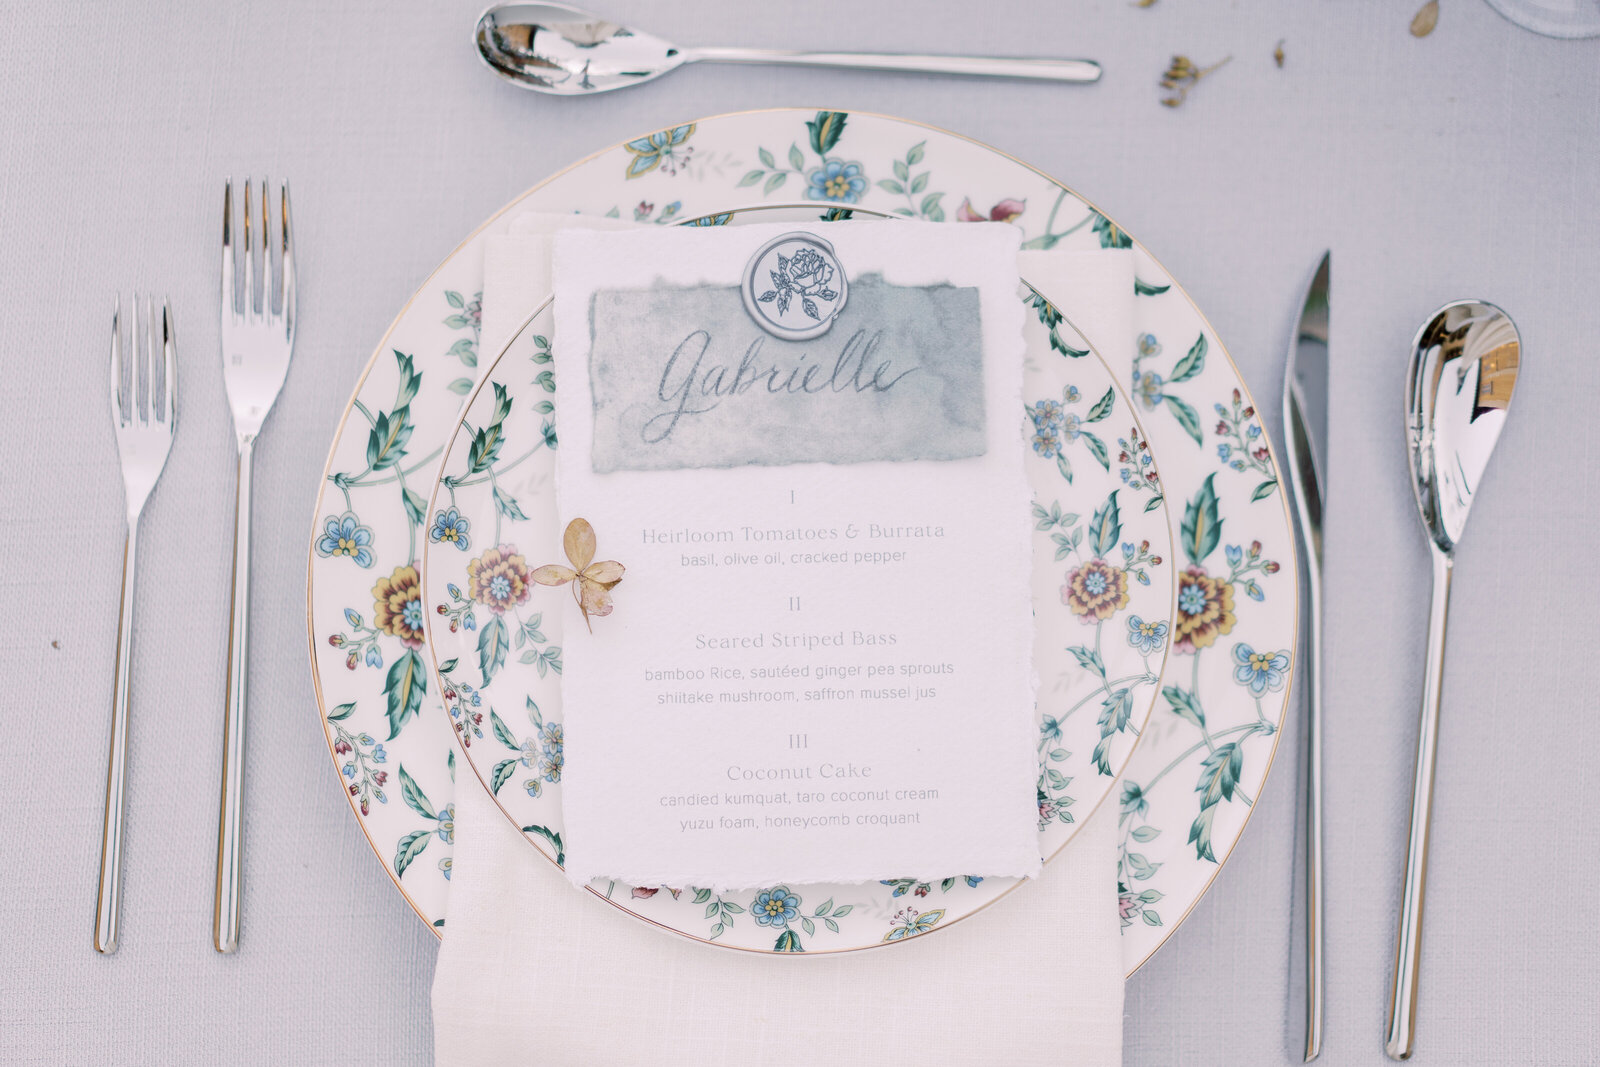 Menu place card on white card stock with gray cursive font atop green floral plates with silver utensils.